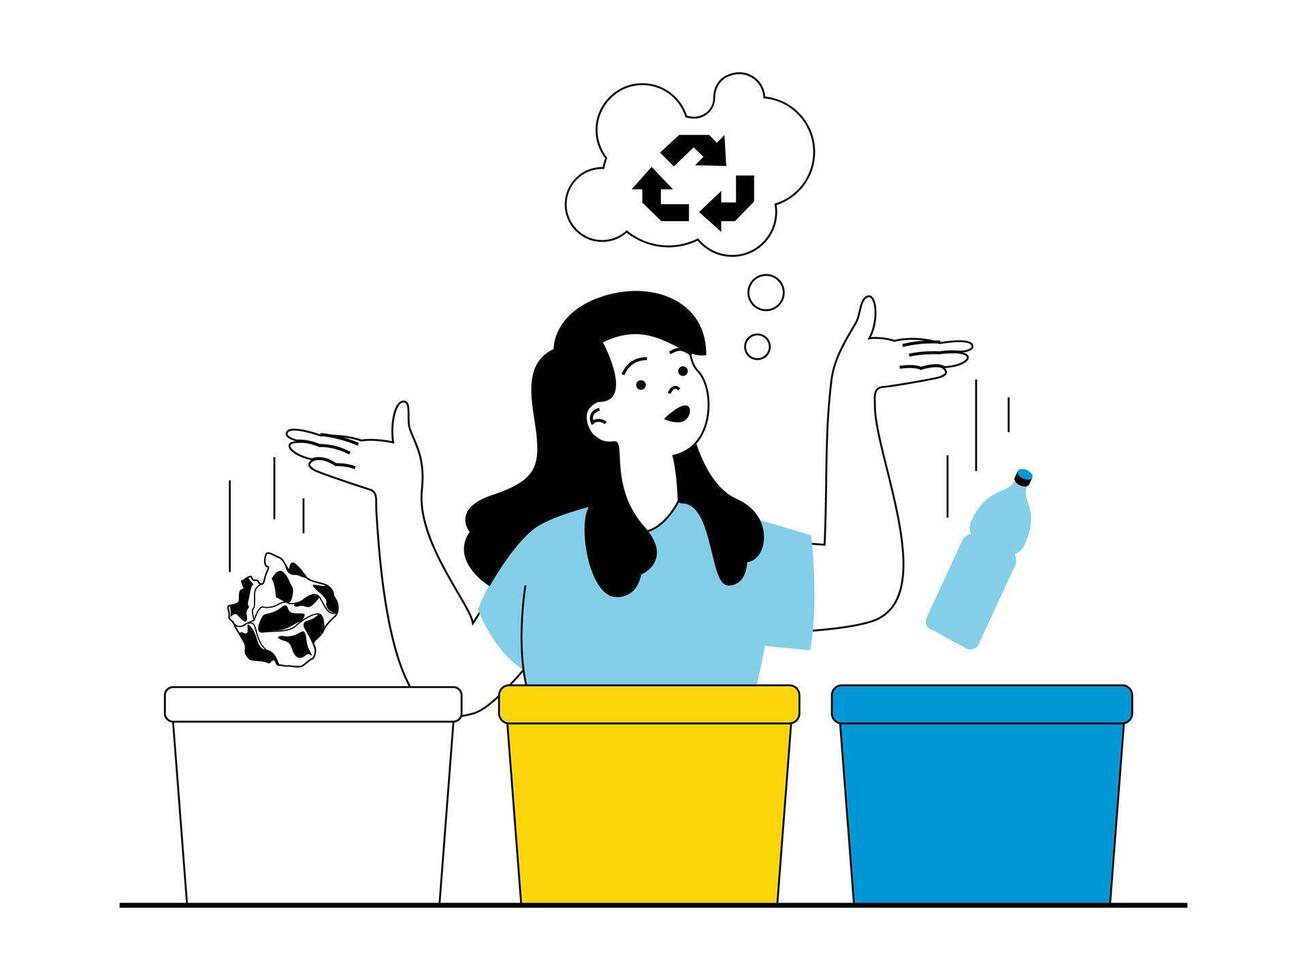 Zero waste concept with character situation. Woman collects, sorts and separates garbage into special containers for recycling and reuse. Vector illustration with people scene in flat design for web